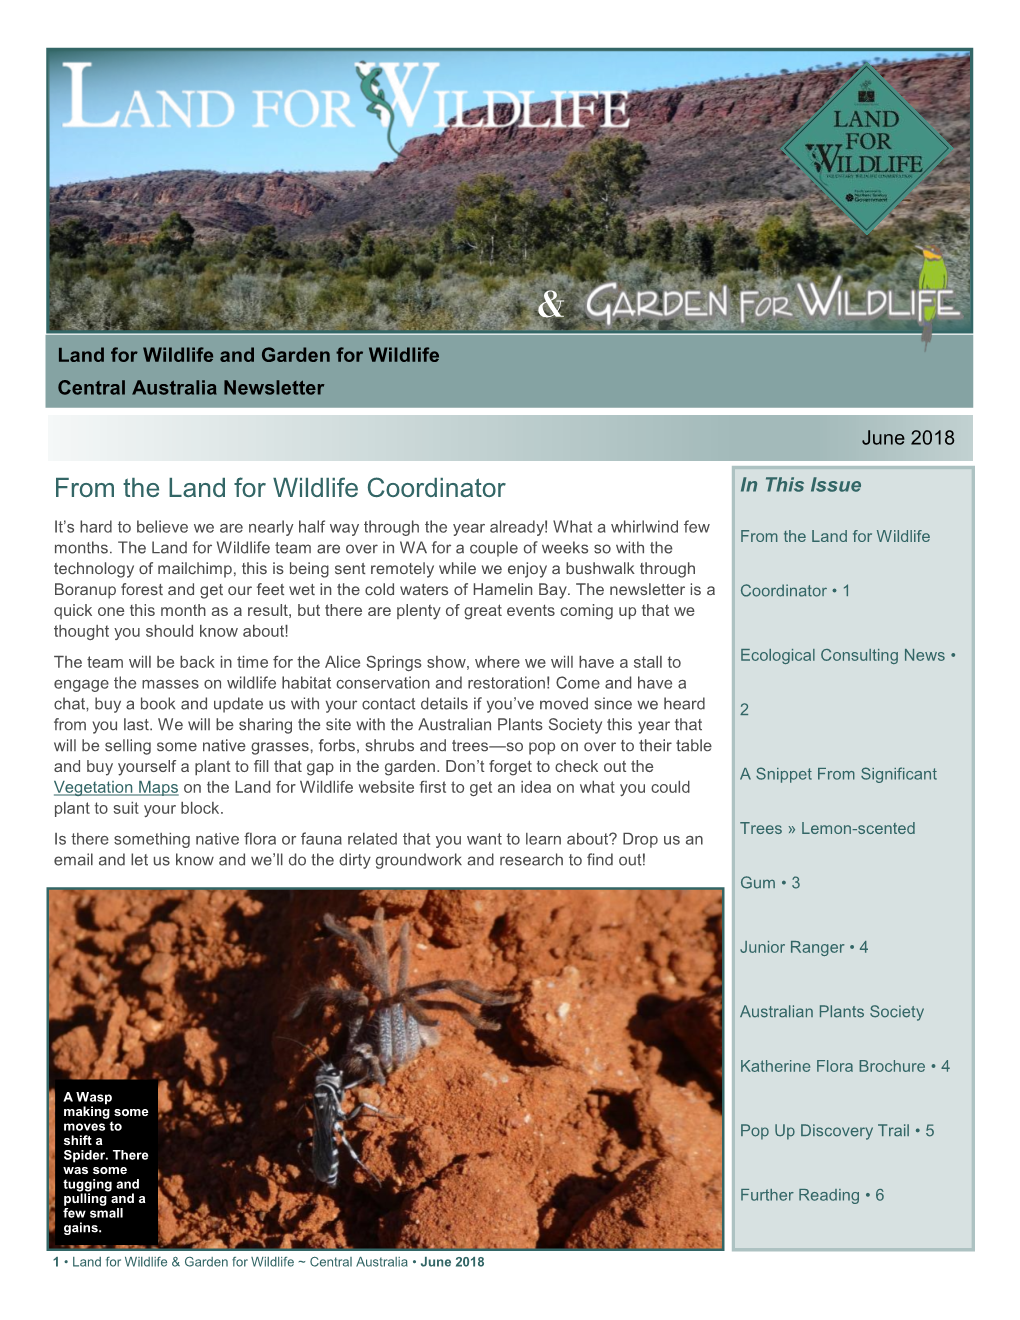 June 2018 Newsletter [PDF 1 MB]Ecological Consulting News, A